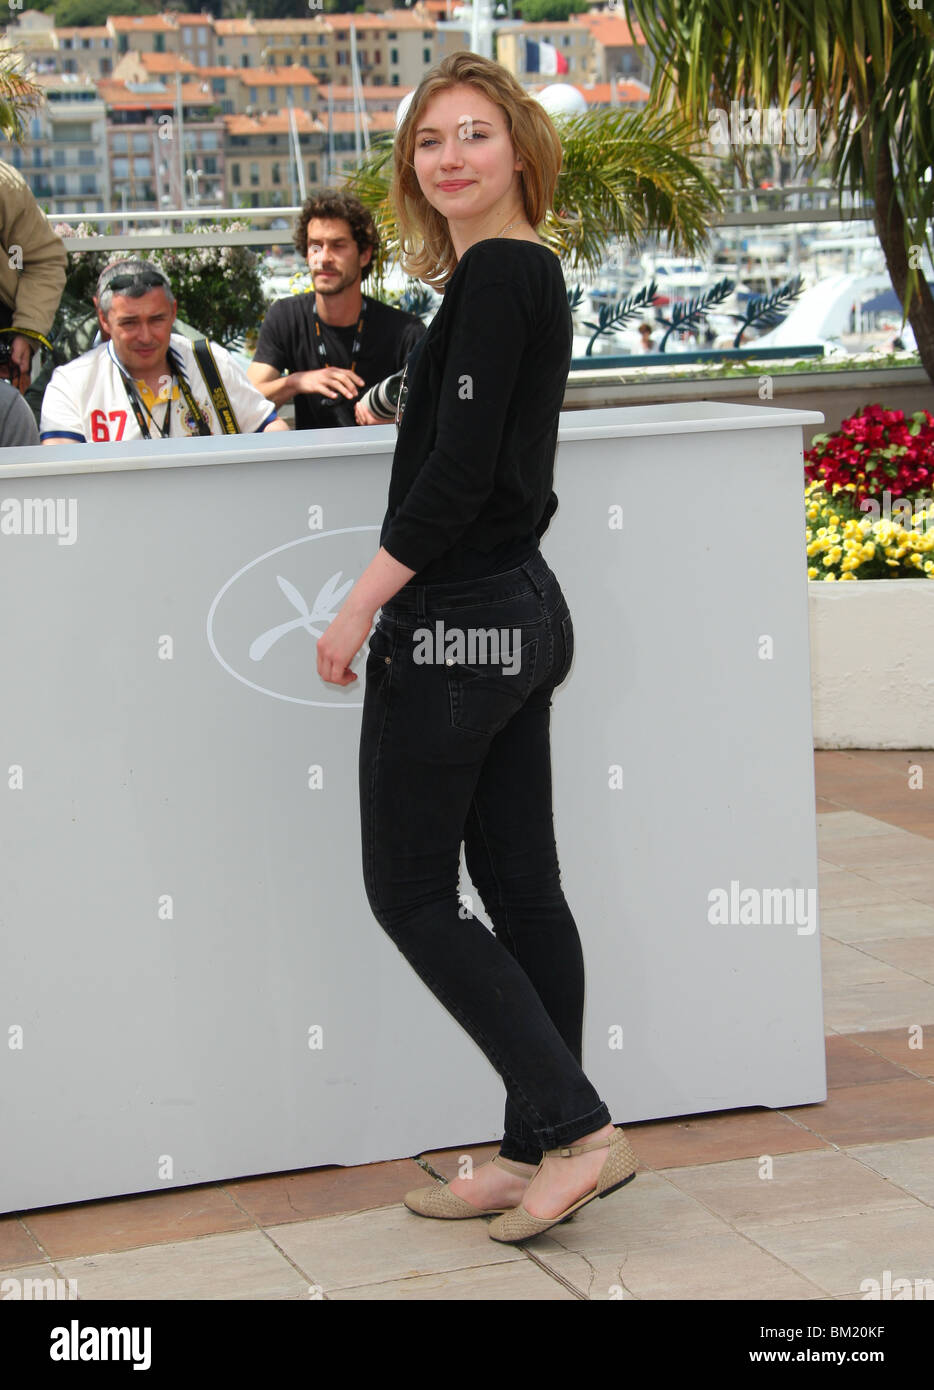 IMOGEN POOTS CHATROOM PHOTOCALL CANNES FILM FESTIVAL 2010 PALAIS DES  FESTIVAL CANNES FRANCE 14 May 2010 Stock Photo - Alamy